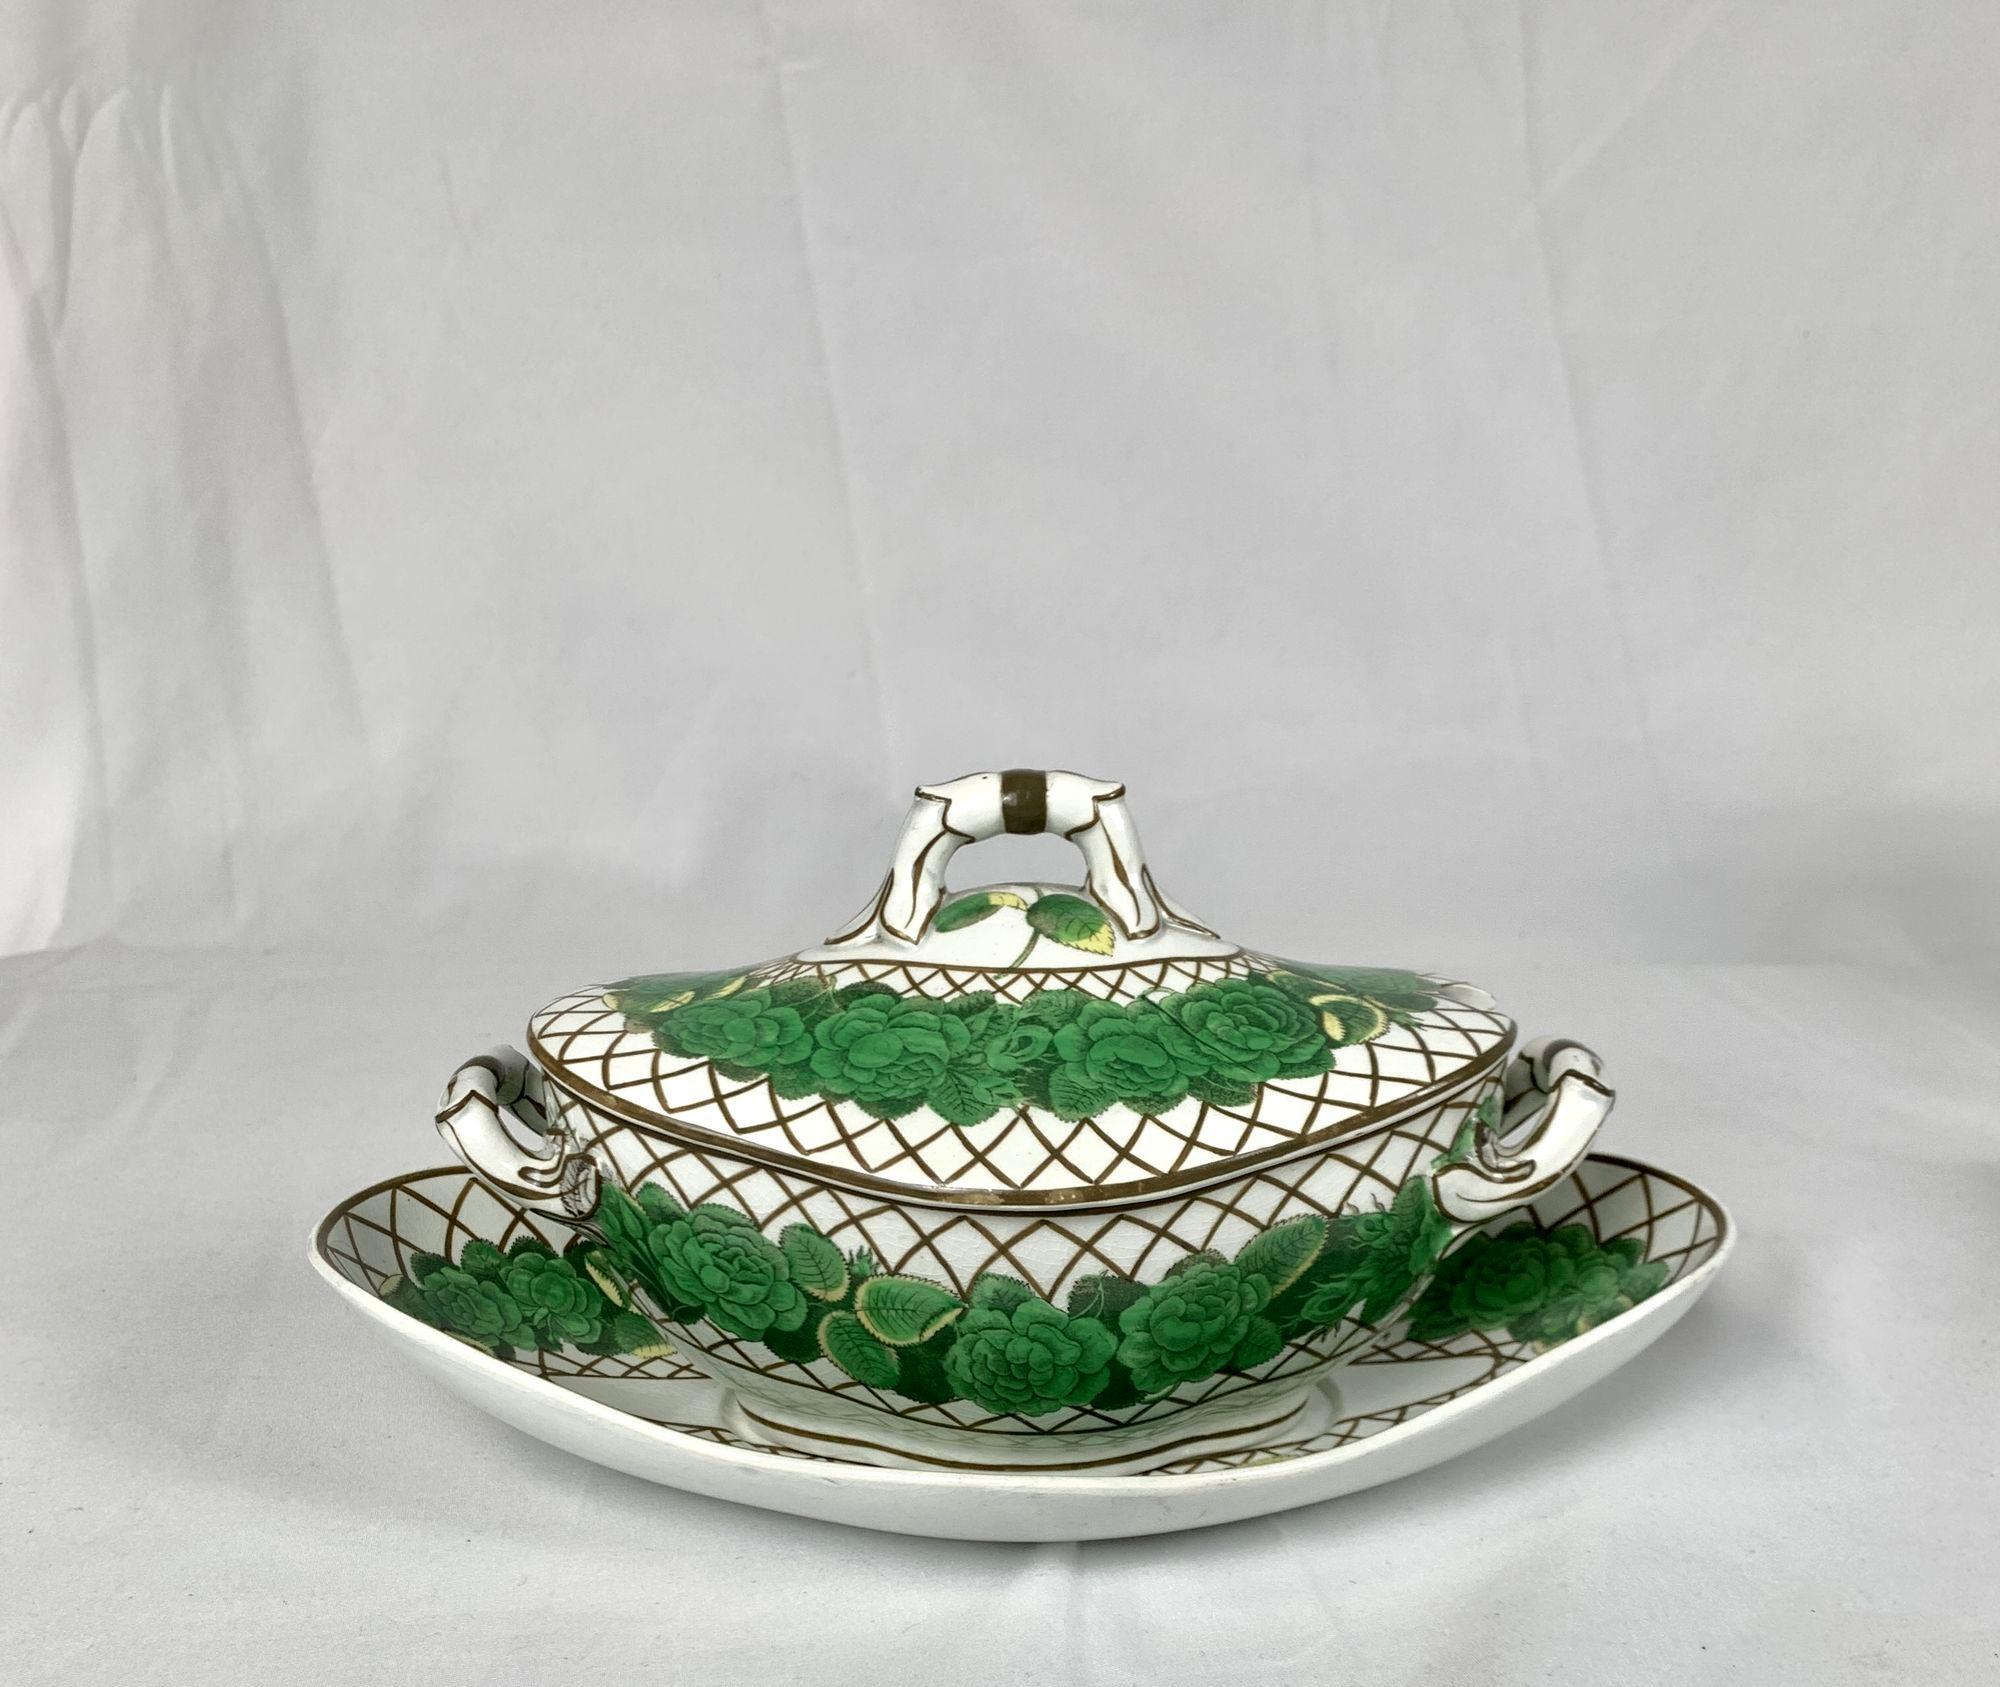 Pearlware Sauce Tureen and Four Oval Serving Dishes by Spode England C-1810 In Excellent Condition For Sale In Katonah, NY